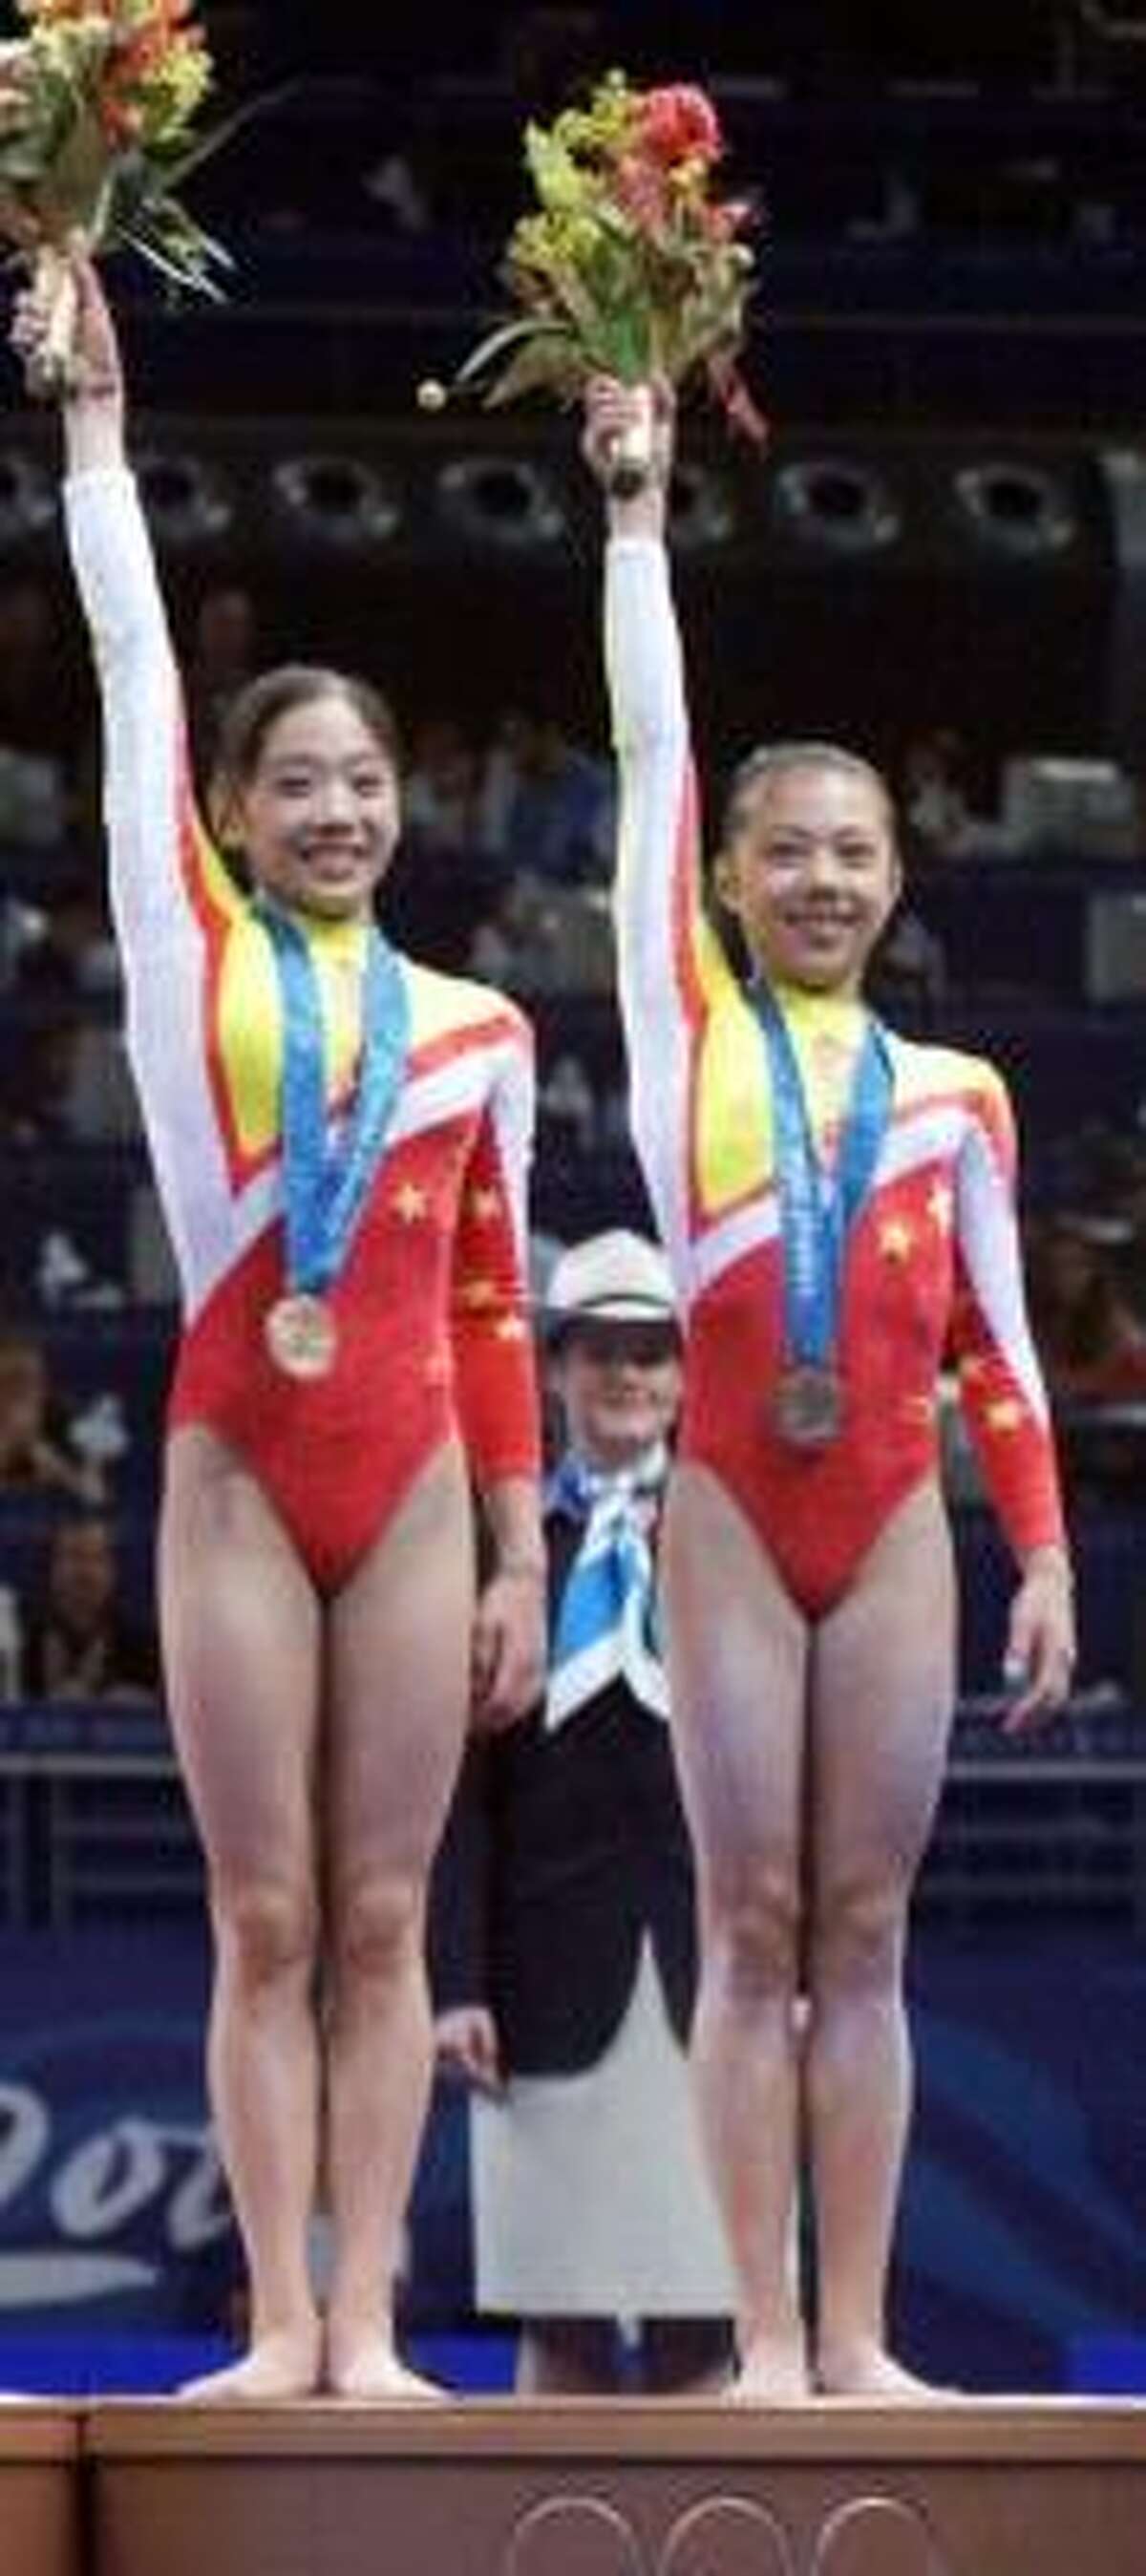 The International Olympic Committee determined Dong Fangxiao, right, was only 14 at the 2000 Sydney Olympics.